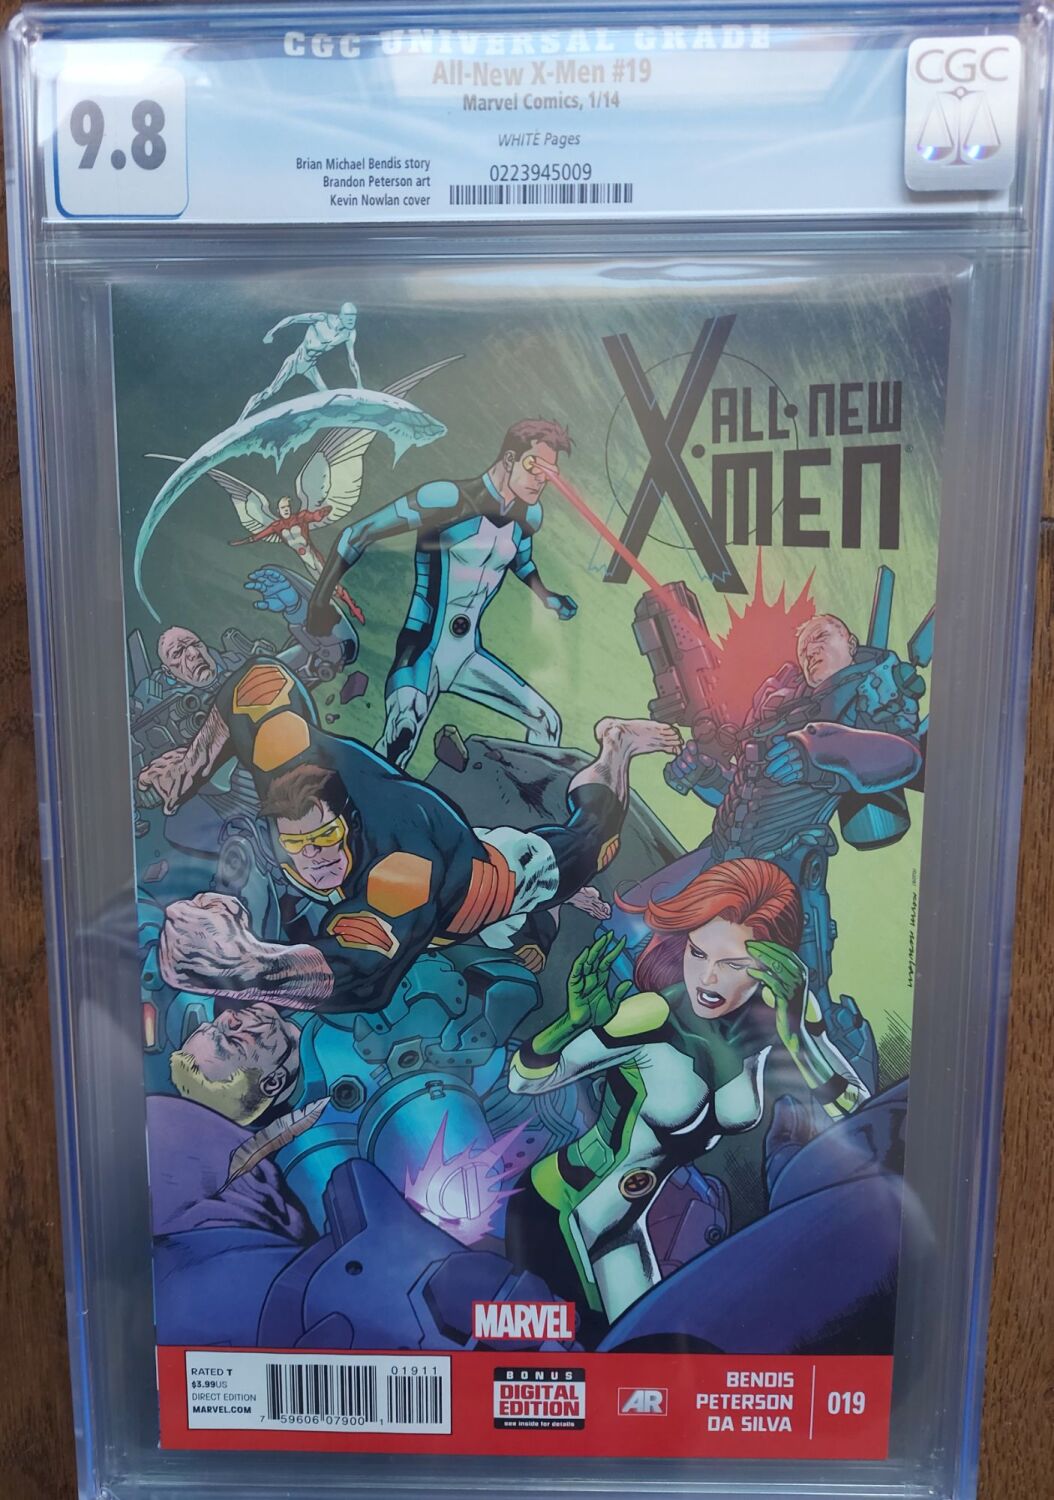 All New X-Men #16 - CGC 9.8 - White Pages